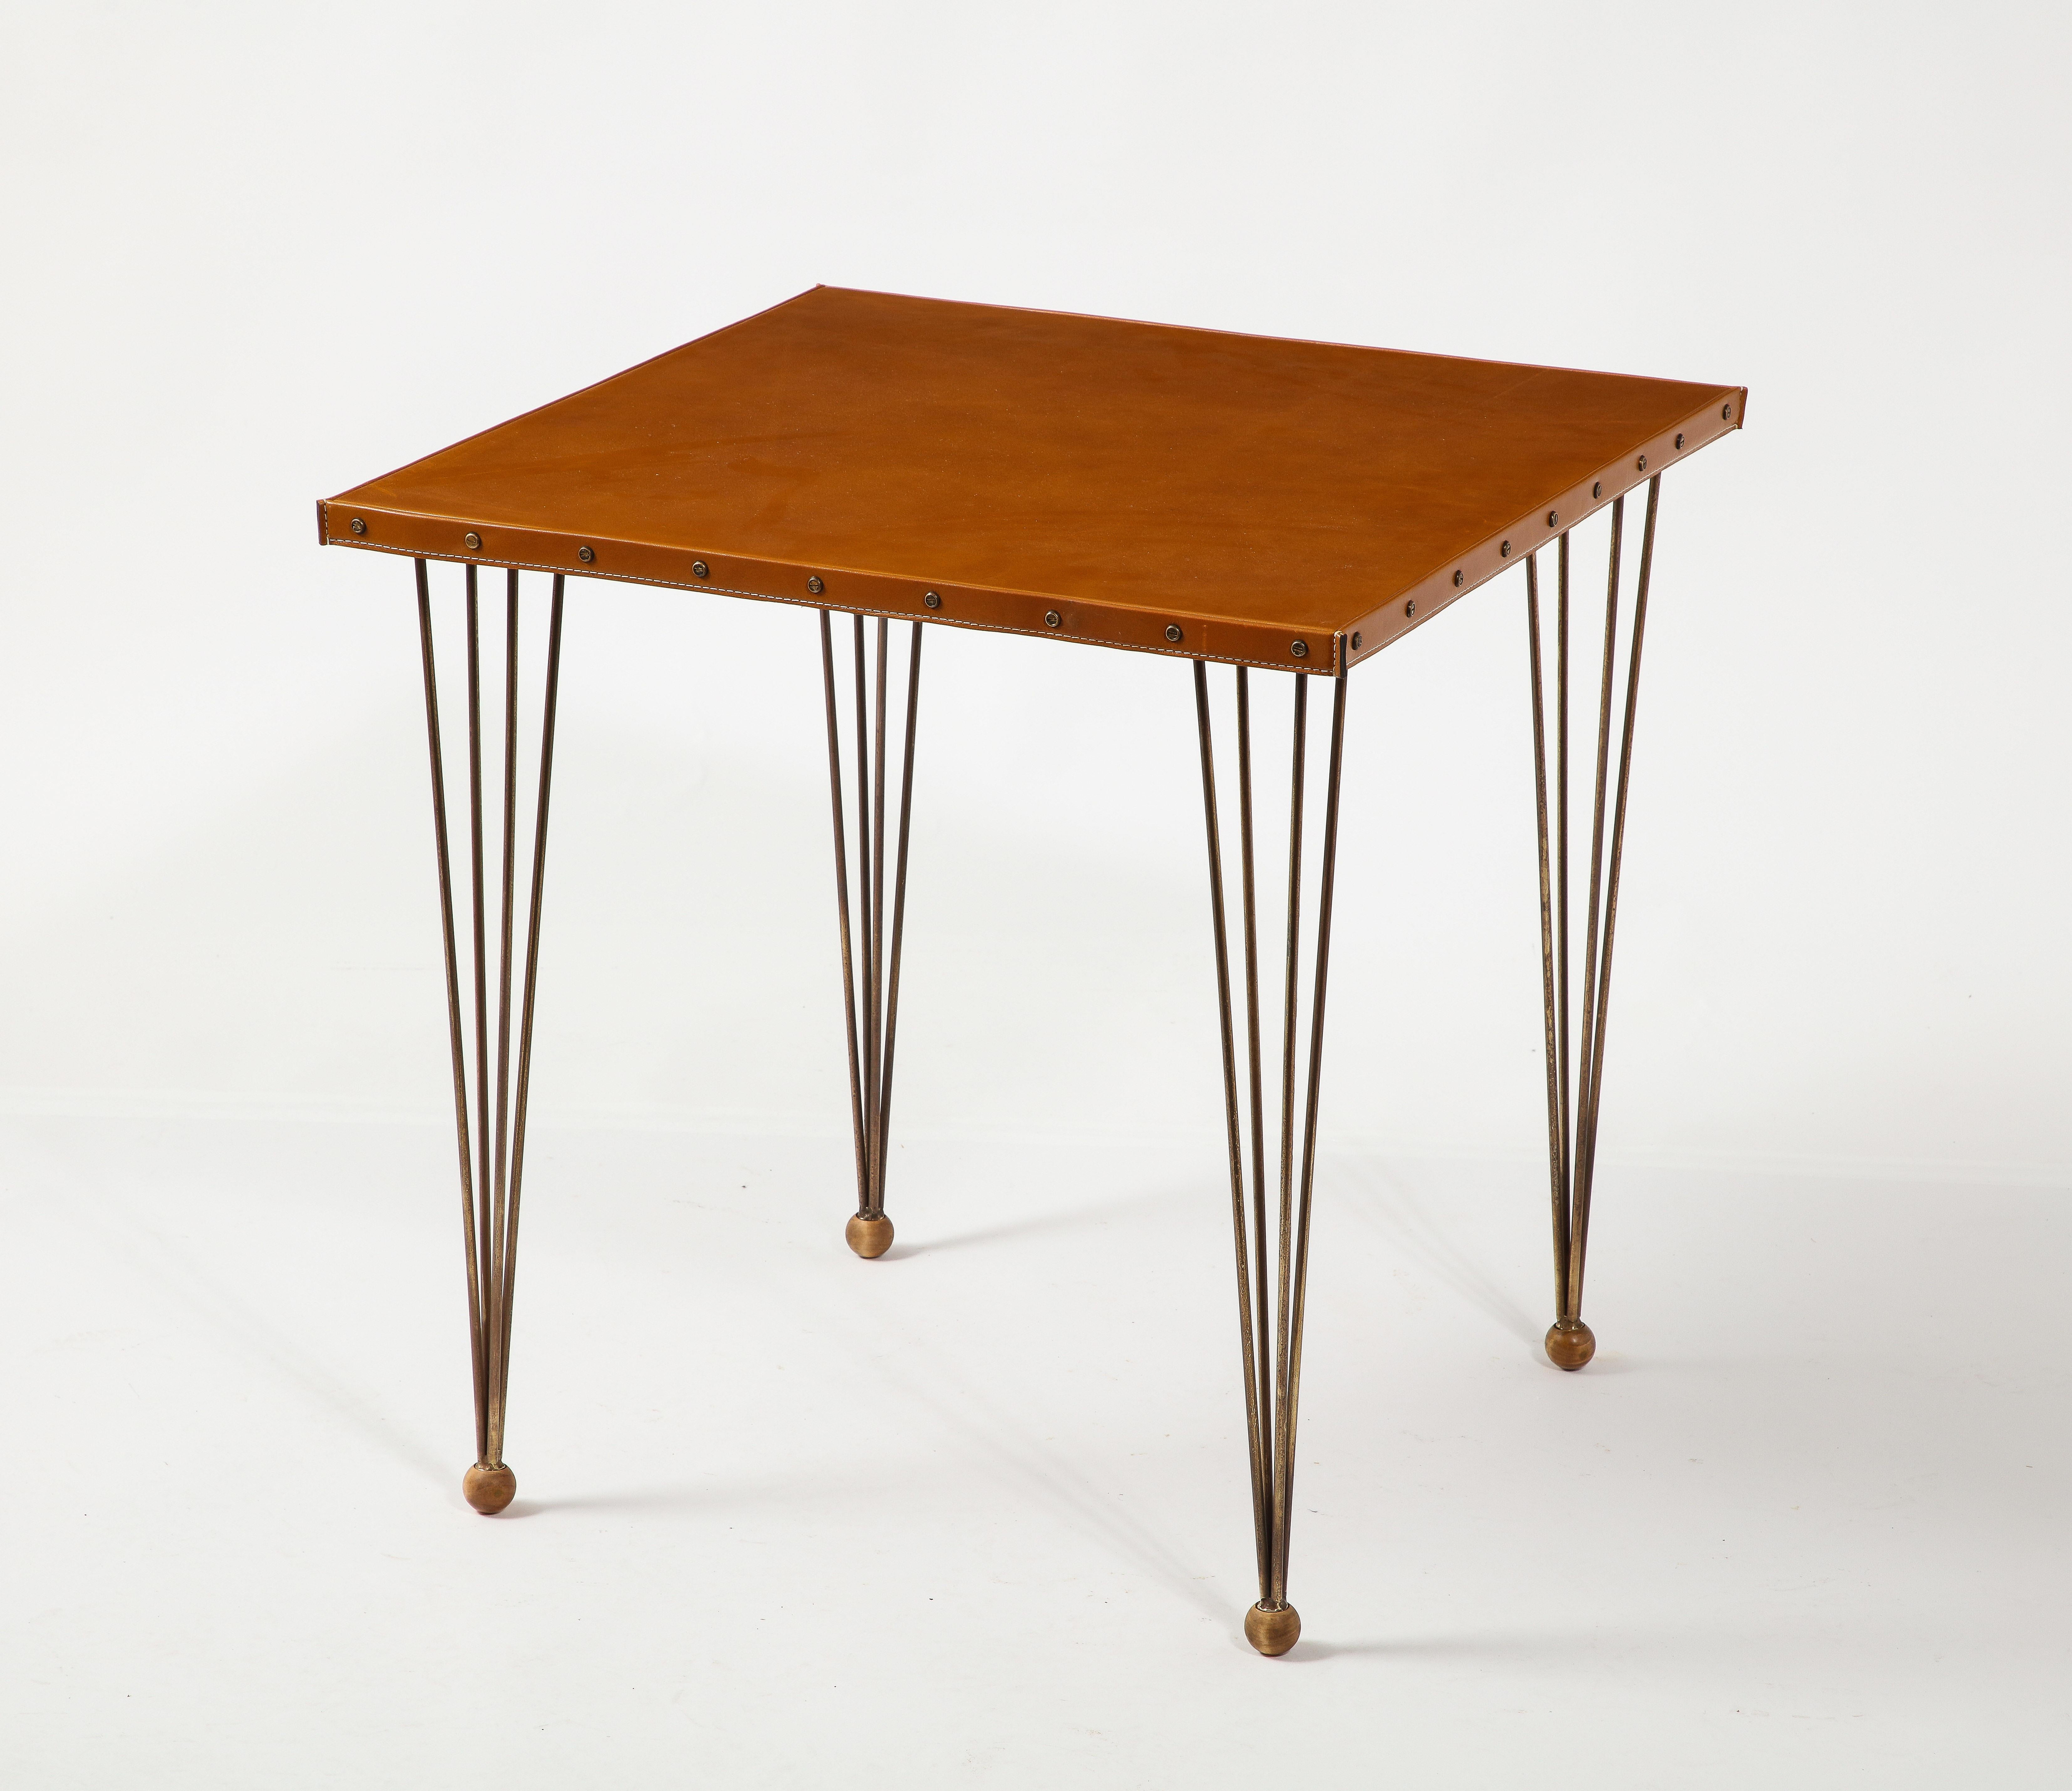 Modern Jacques Adnet Brass & Leather End Tables, France 1950's